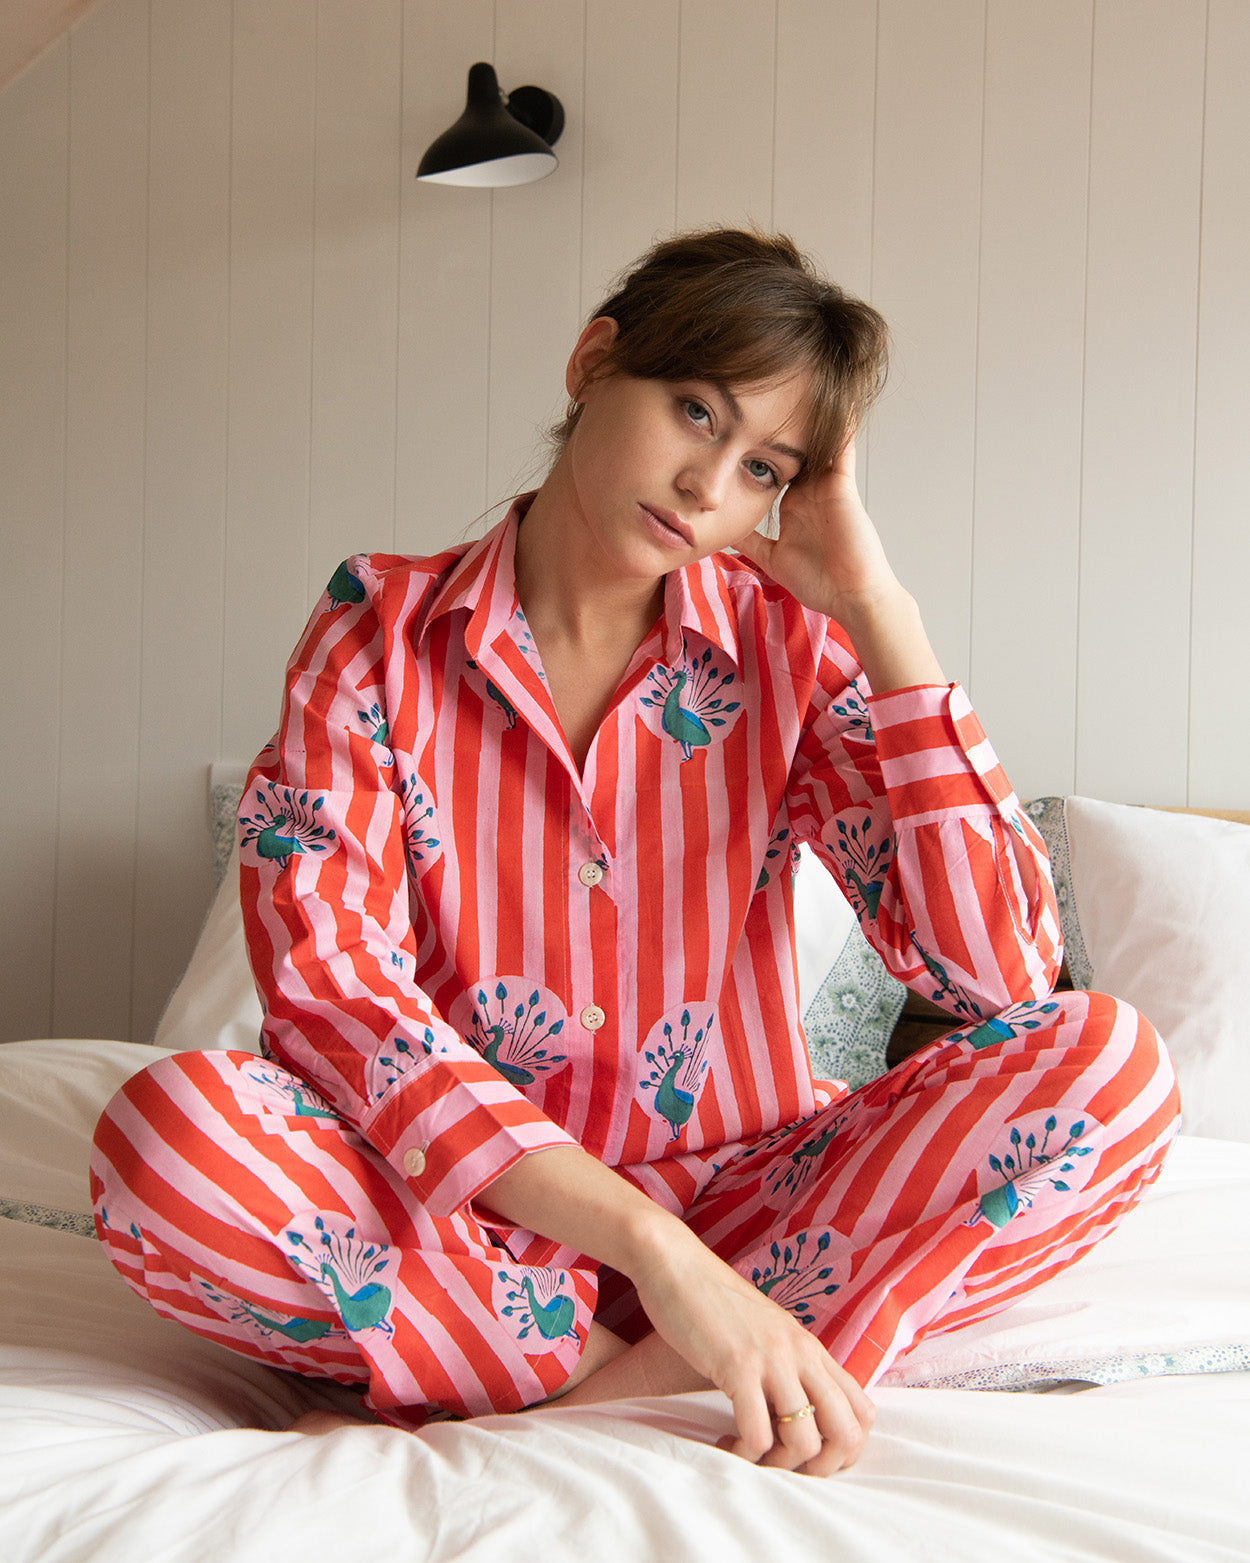 Leveret Womens Two Piece Cotton Pajamas Striped Red and White M